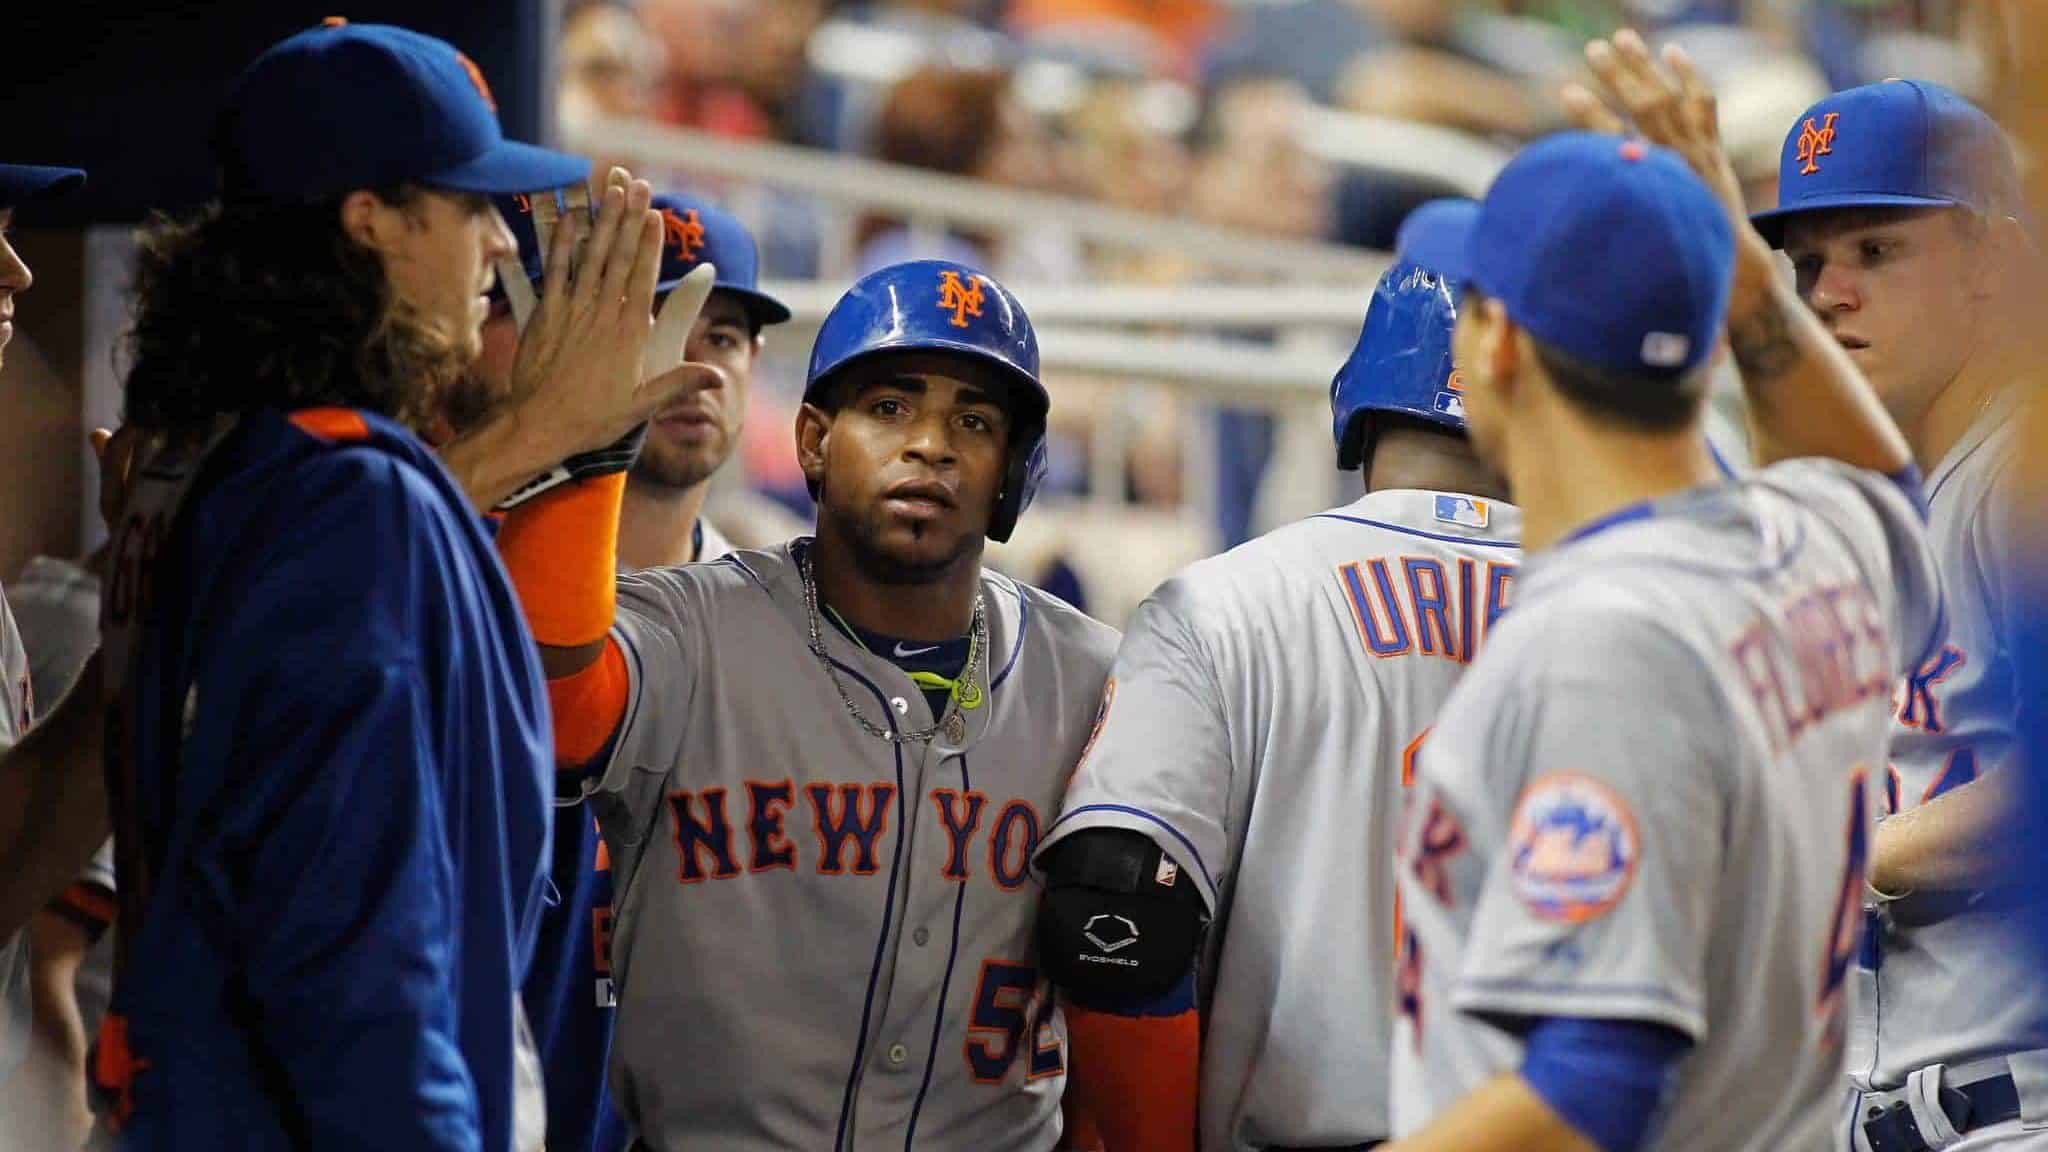 MIAMI, FL - SEPTEMBER 04: Yoenis Cespedes #52 of the New York Mets is congratulated by teammates including pitcher Jacob deGrom (L) after he scored in the sixth inning of play against the Miami Marlins at Marlins Park on September 4, 2015 in Miami, Florida.